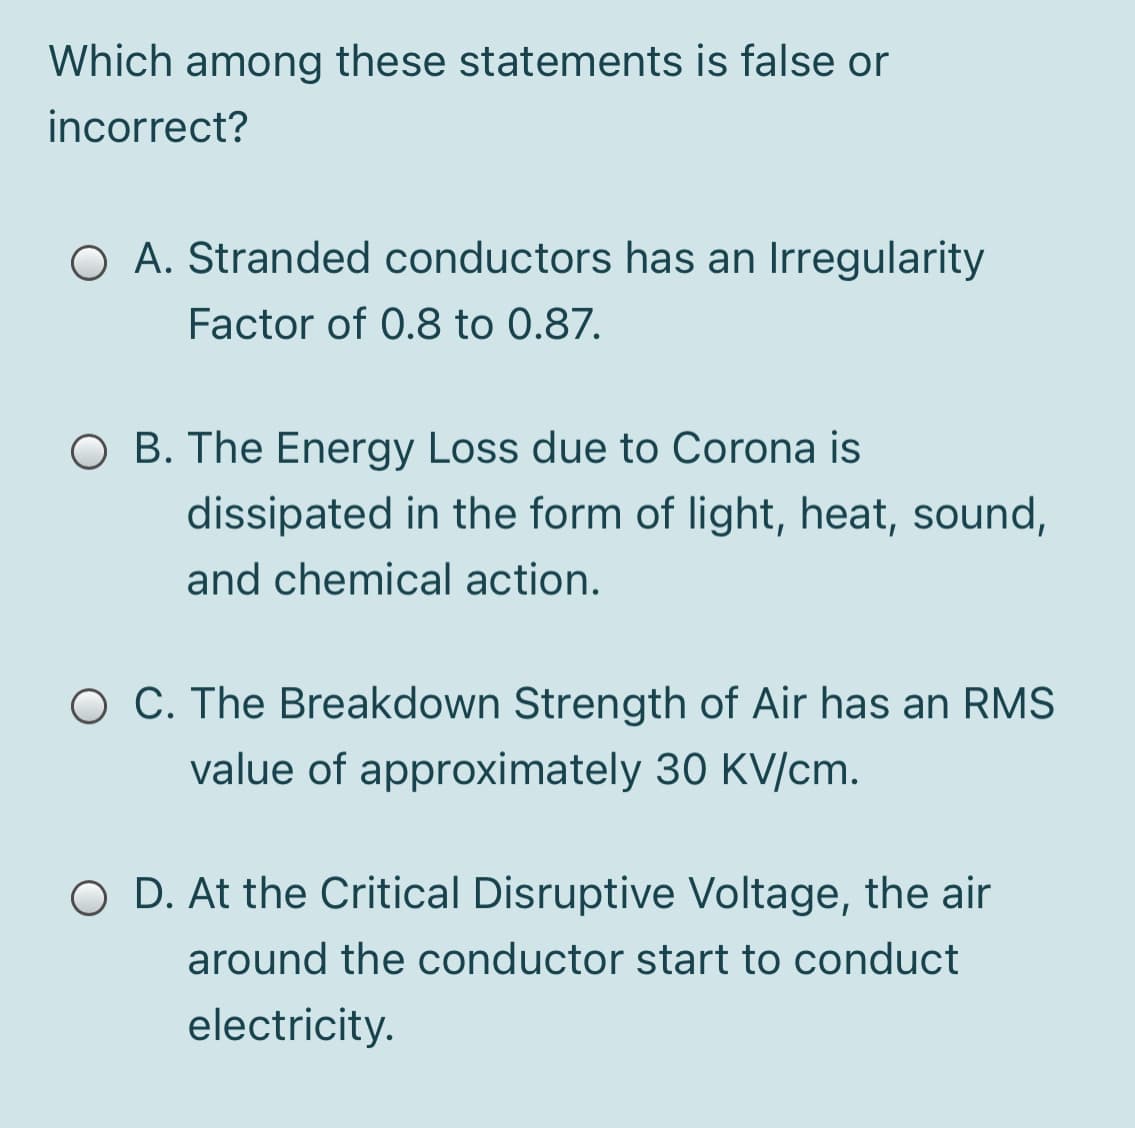 Which among these statements is false or
incorrect?
O A. Stranded conductors has an Irregularity
Factor of 0.8 to 0.87.
O B. The Energy Loss due to Corona is
dissipated in the form of light, heat, sound,
and chemical action.
O C. The Breakdown Strength of Air has an RMS
value of approximately 30 KV/cm.
O D. At the Critical Disruptive Voltage, the air
around the conductor start to conduct
electricity.
